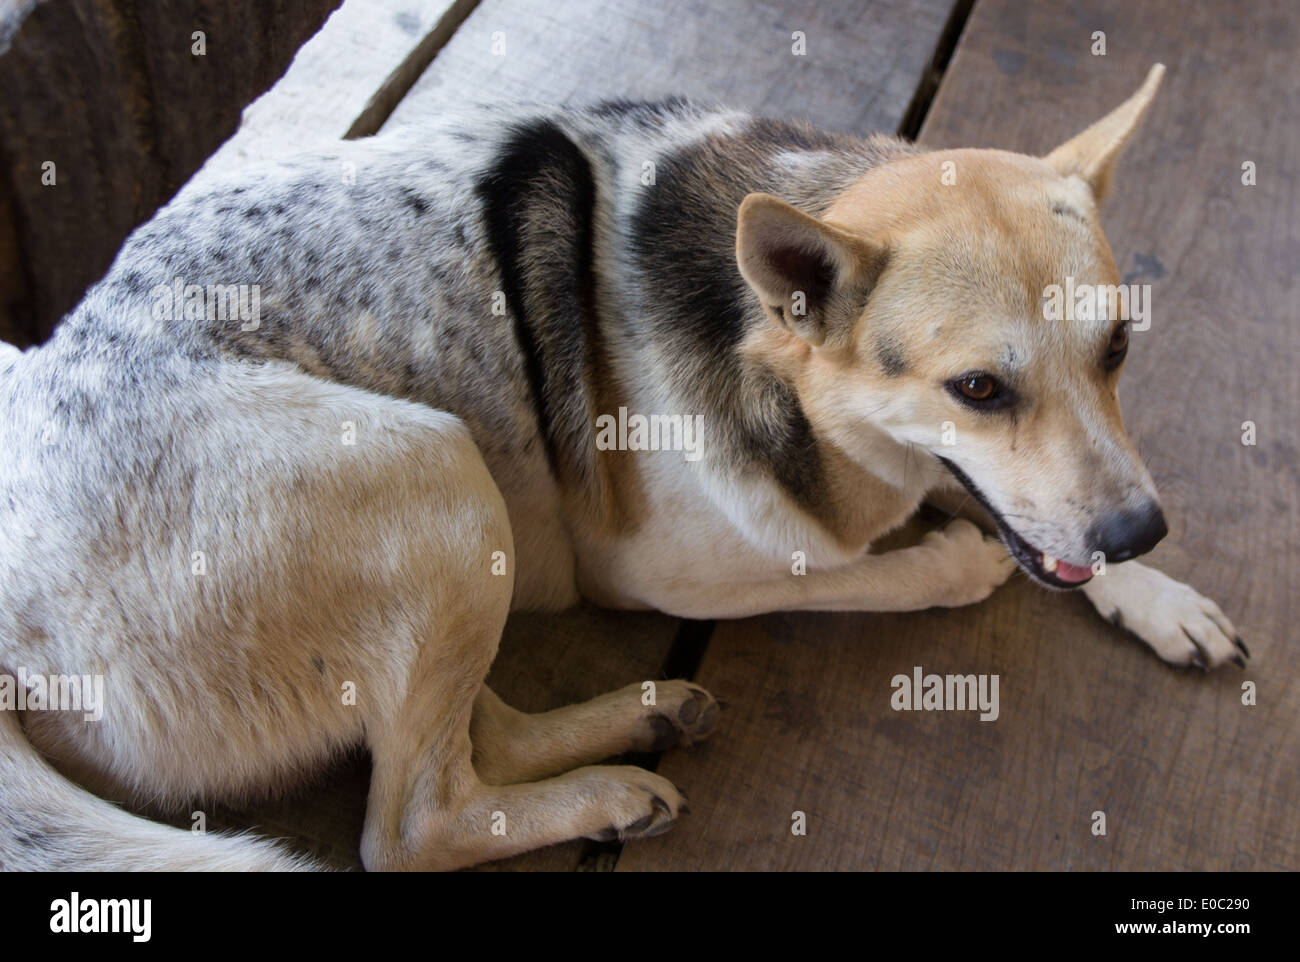 A dog rest on the floor. Stock Photo